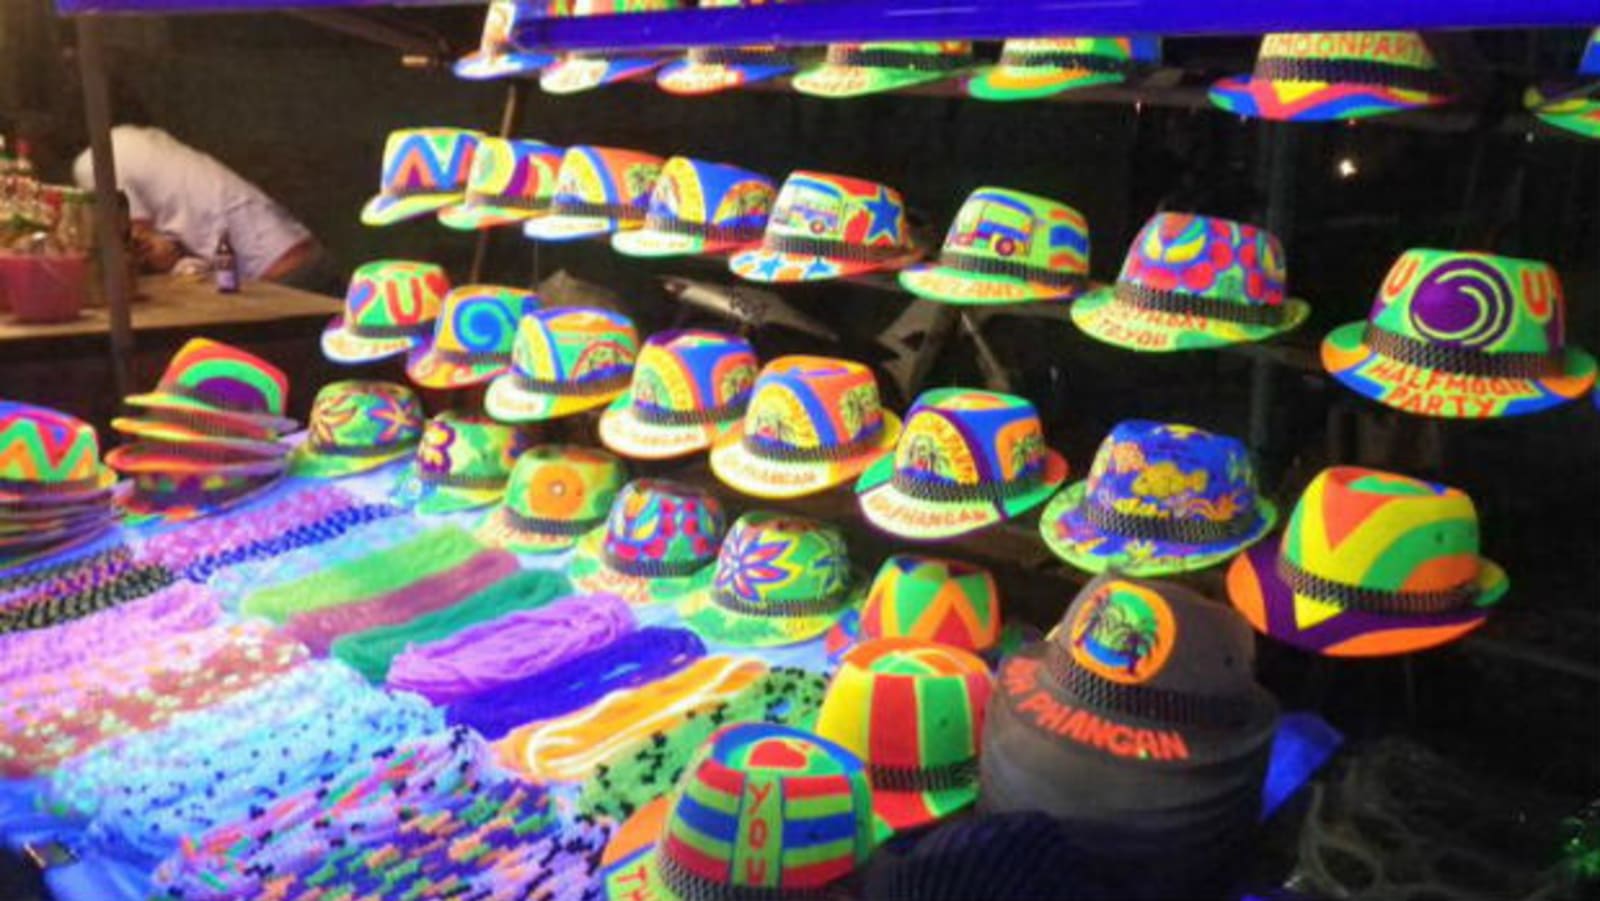 Multi-coloured hats and beaded necklaces on sale at a market stall